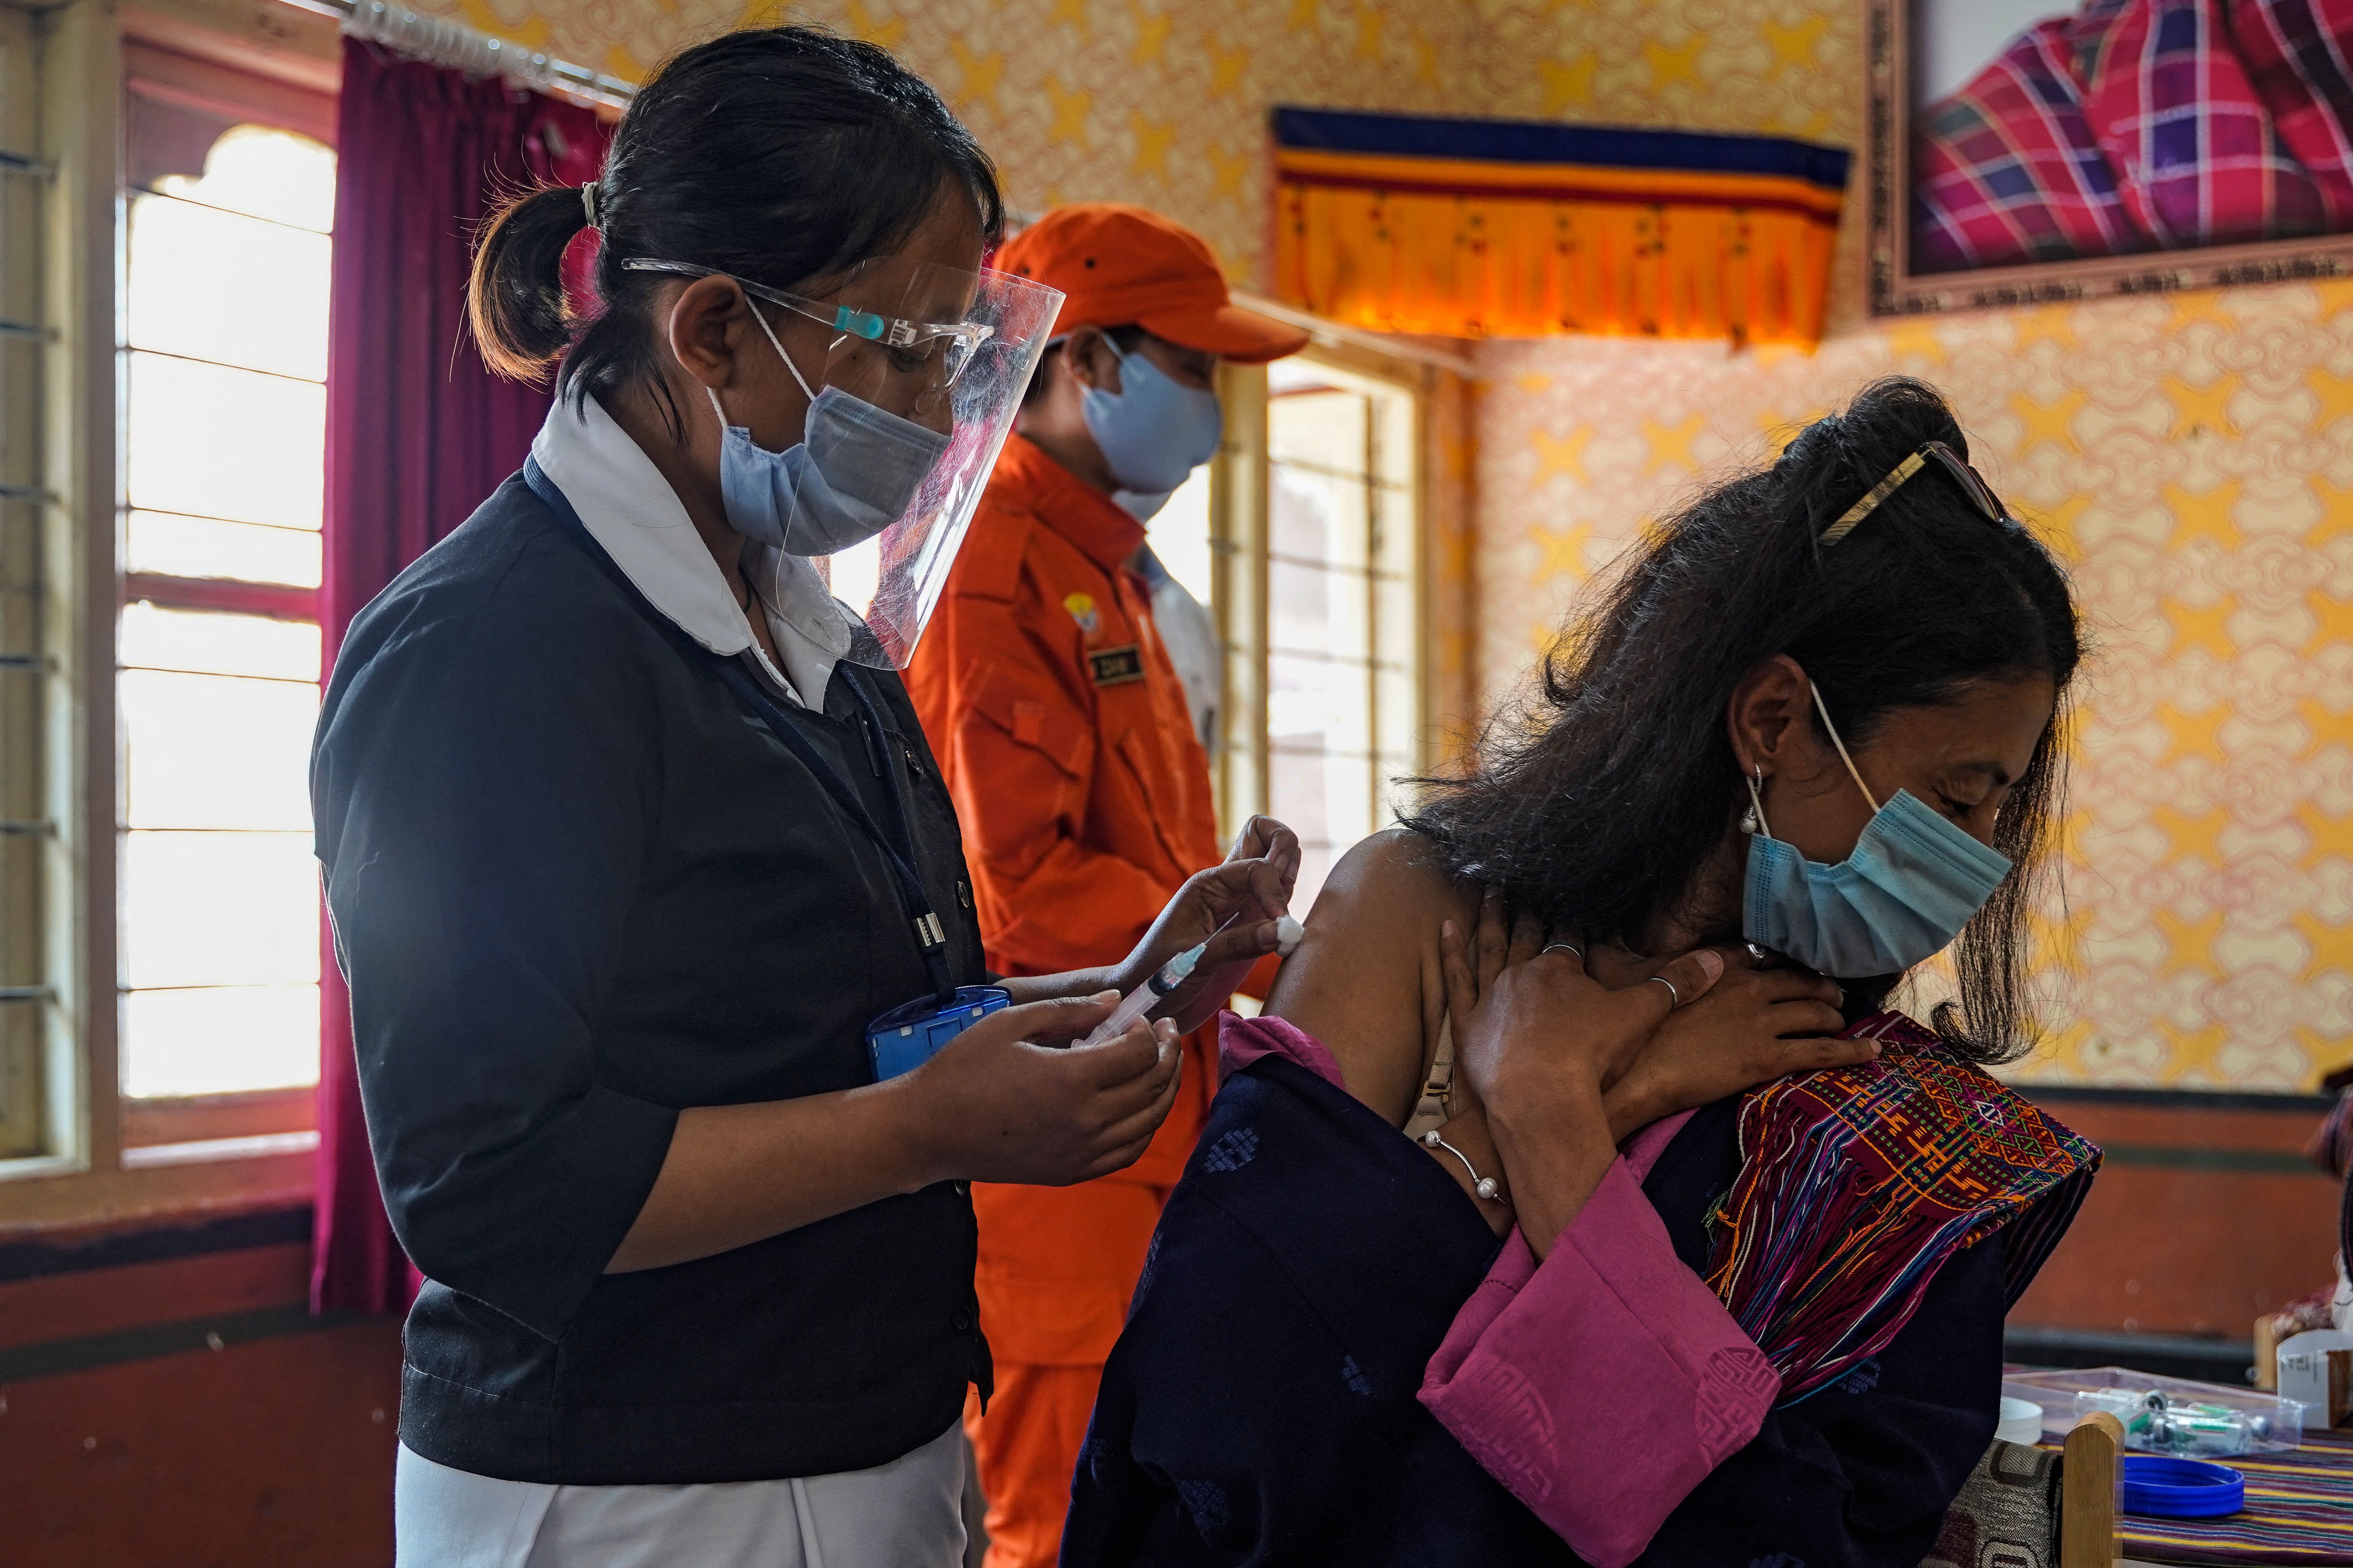 A health worker inoculate a dose of a COVID-19 coronavirus vaccine to a woman during the first day of vaccination in Bhutan, at Lungtenzampa Middle Secondary school in Thimphu on March 27